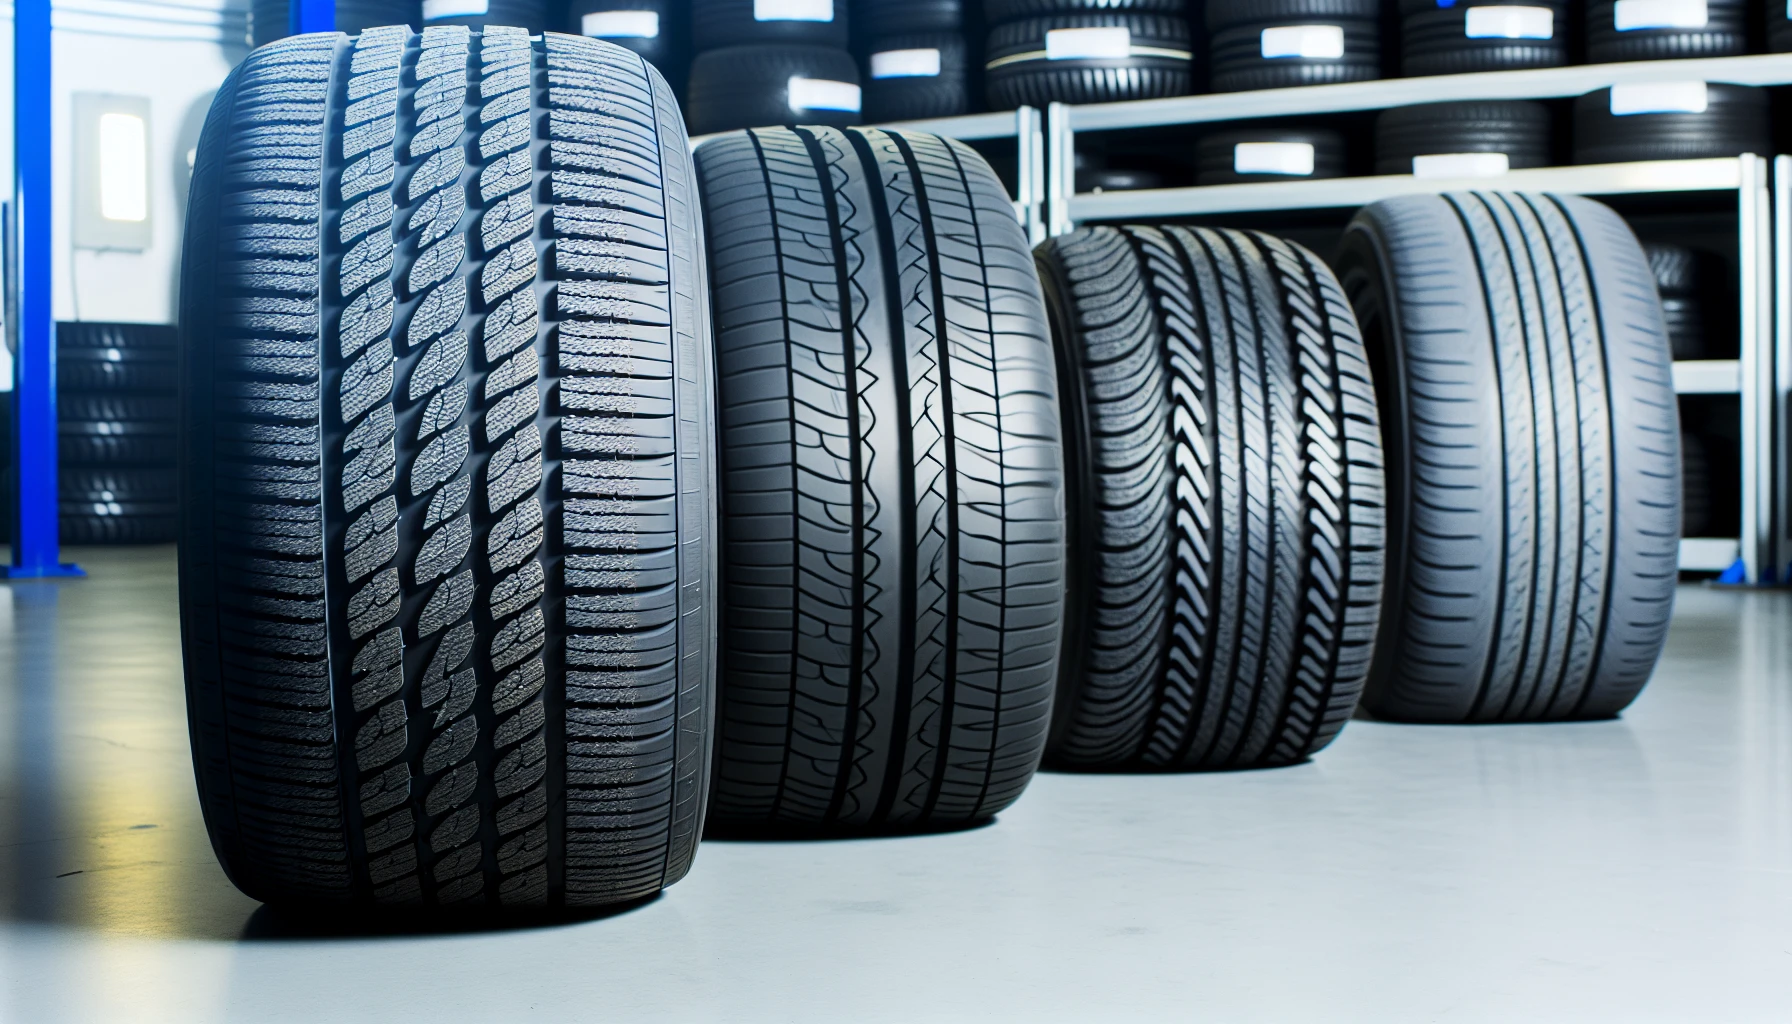 Car tyres with different tread patterns